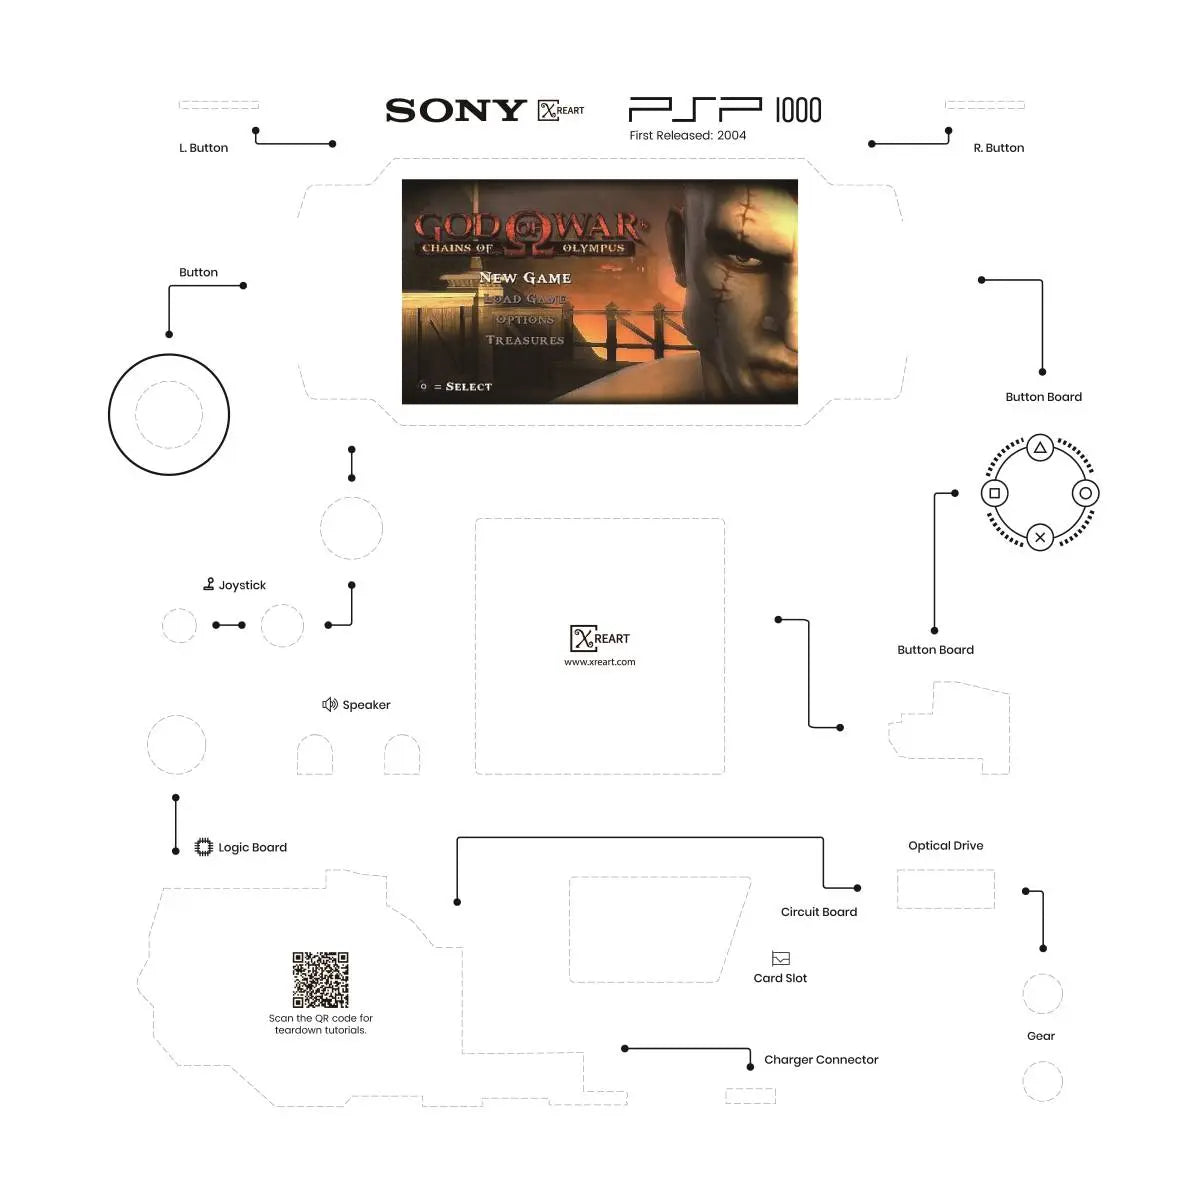 SONY PlayStation Portable (PSP) Layout PDF Download